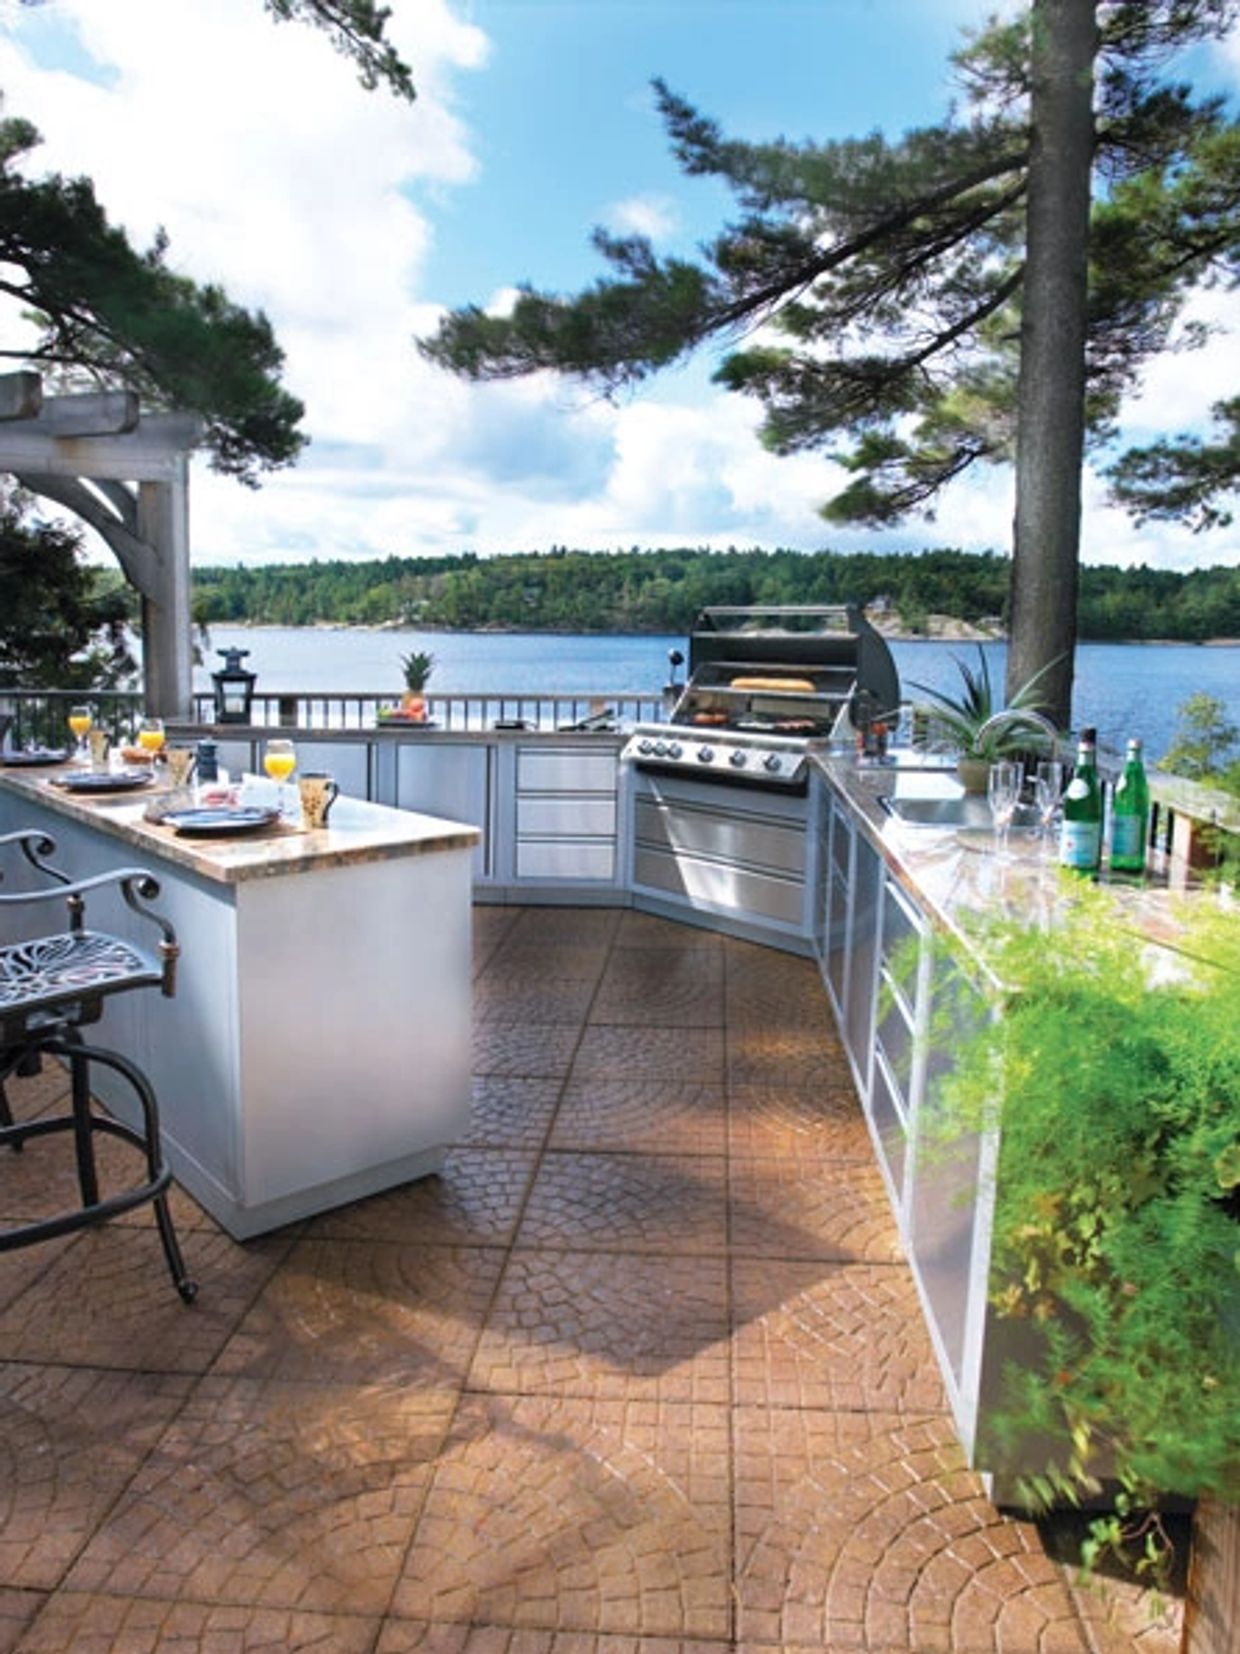 outdoor bbq area, overlooking a lake